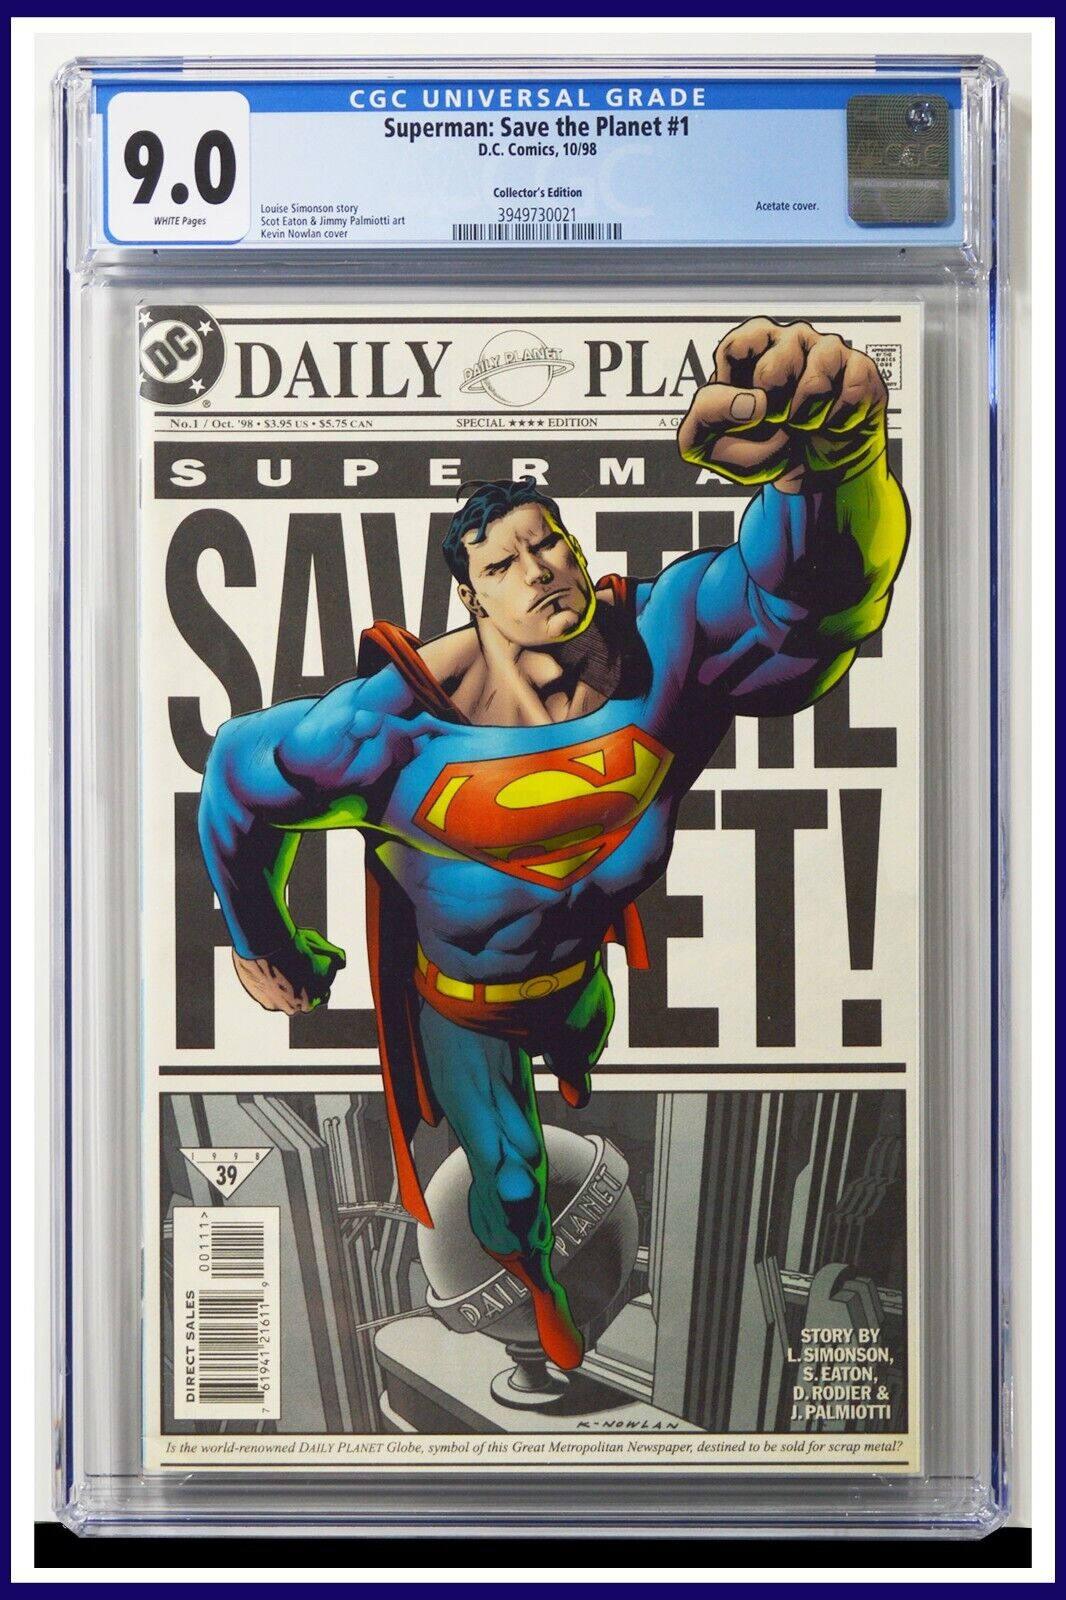 Superman Save The Planet #1 CGC Graded 9.0 DC 1998 Acetate Cover Comic Book.